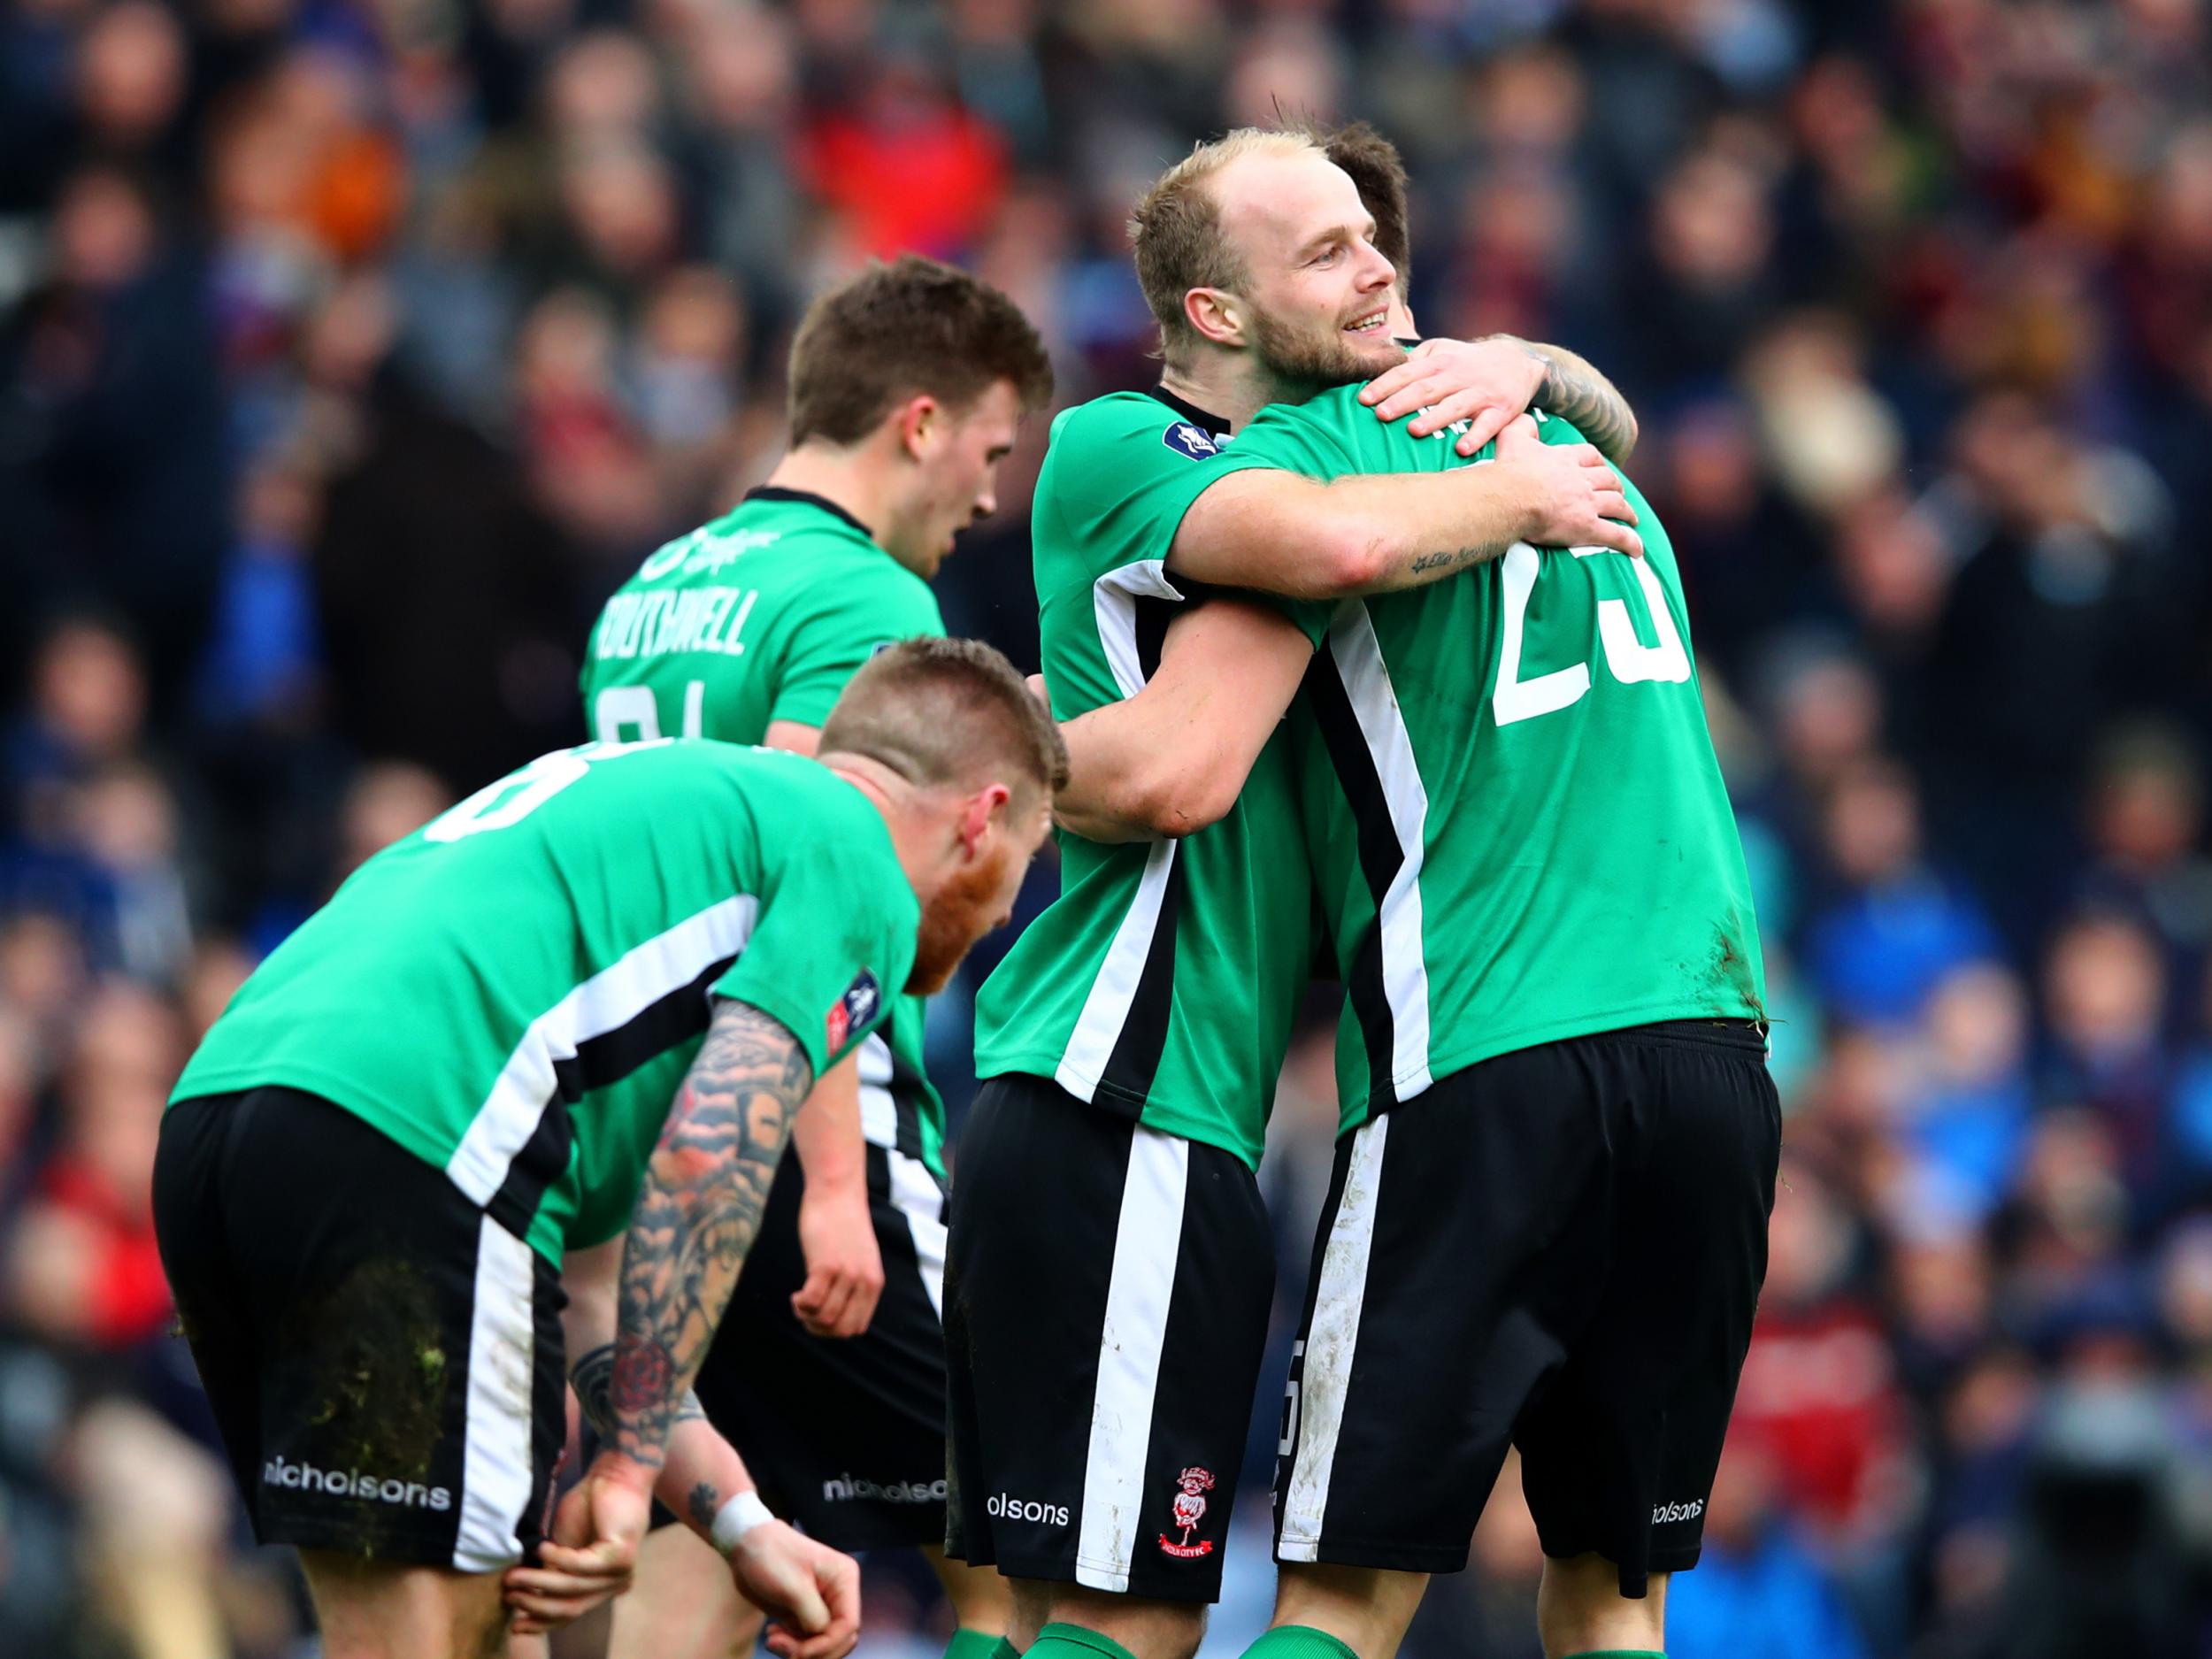 Sean Raggett is mobbed by his team-mates after scoring the winning goal